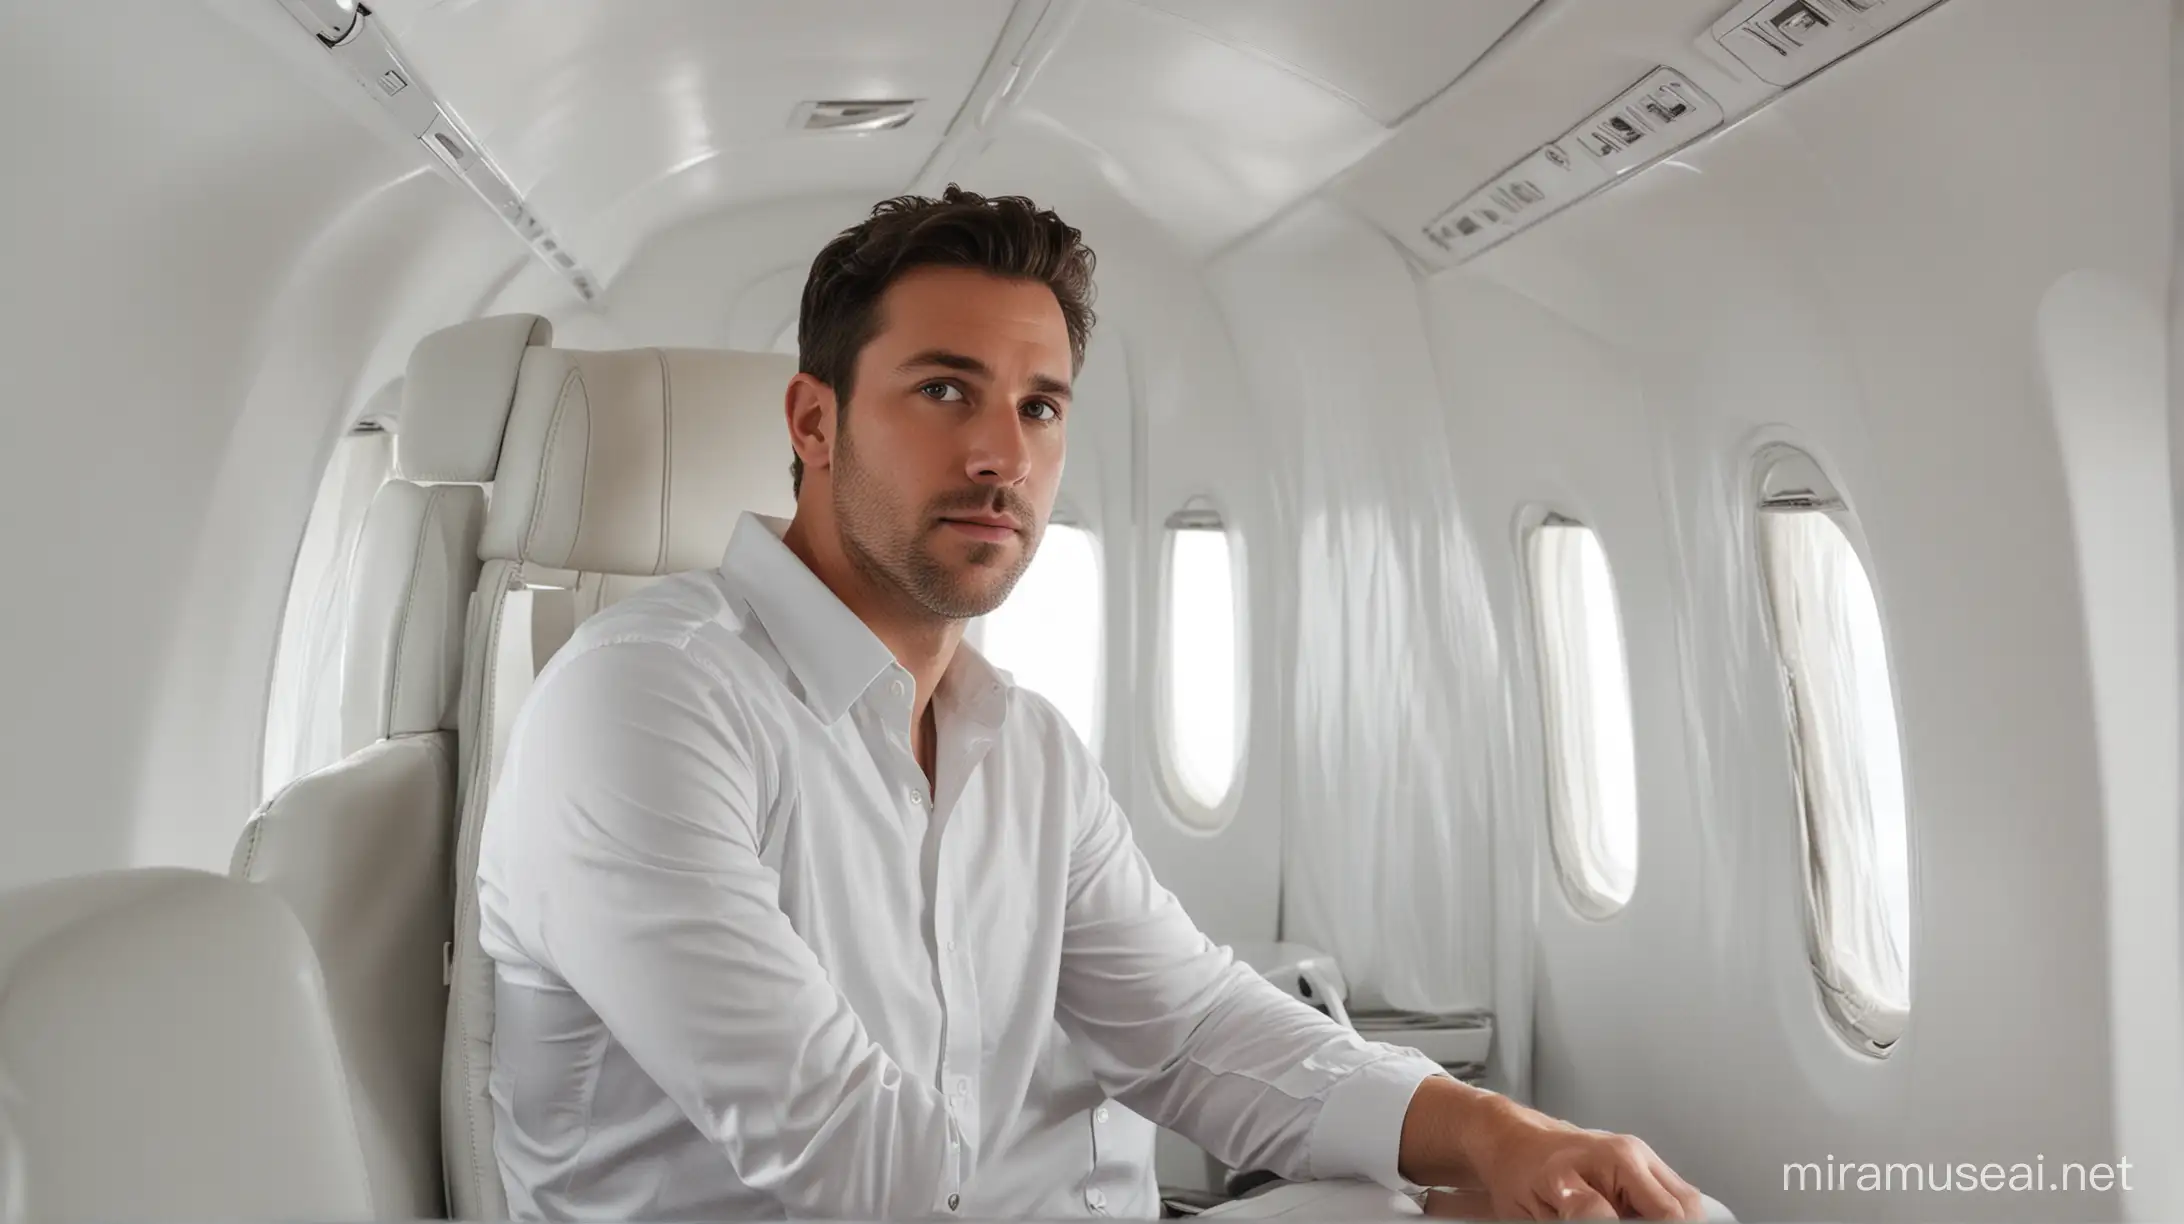 Man sitting inside on fully white plane
Looking in front